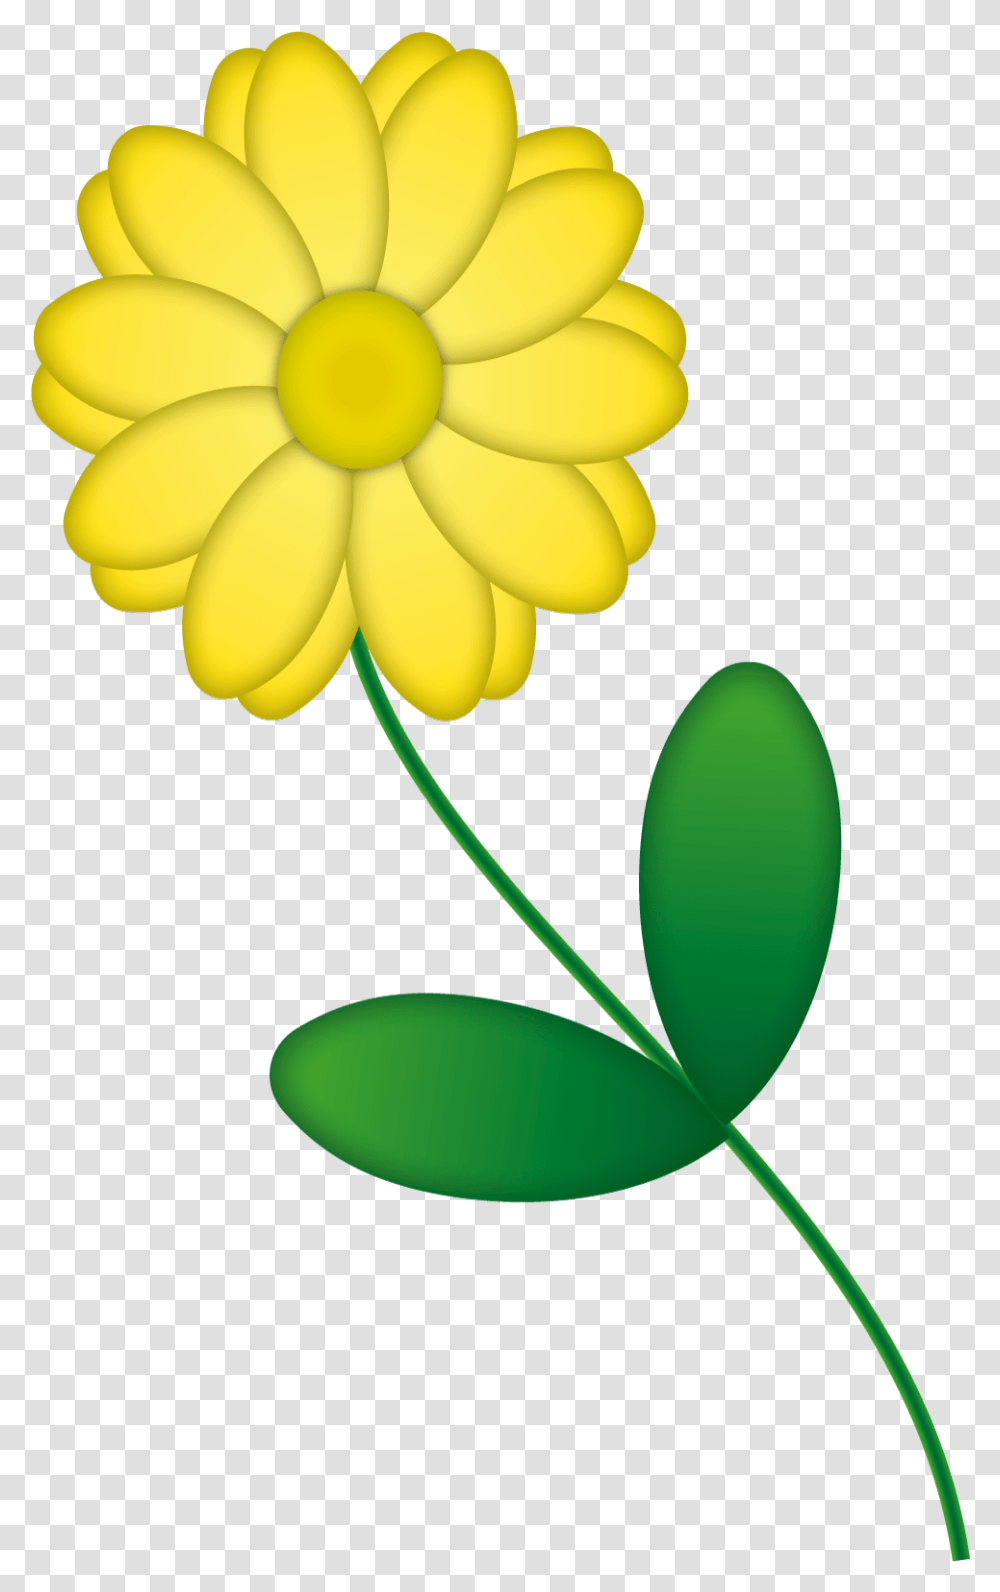 Drawing Of An Isolated Yellow Flower Free Image Flor Amarela Desenho, Plant, Blossom, Petal, Daisy Transparent Png